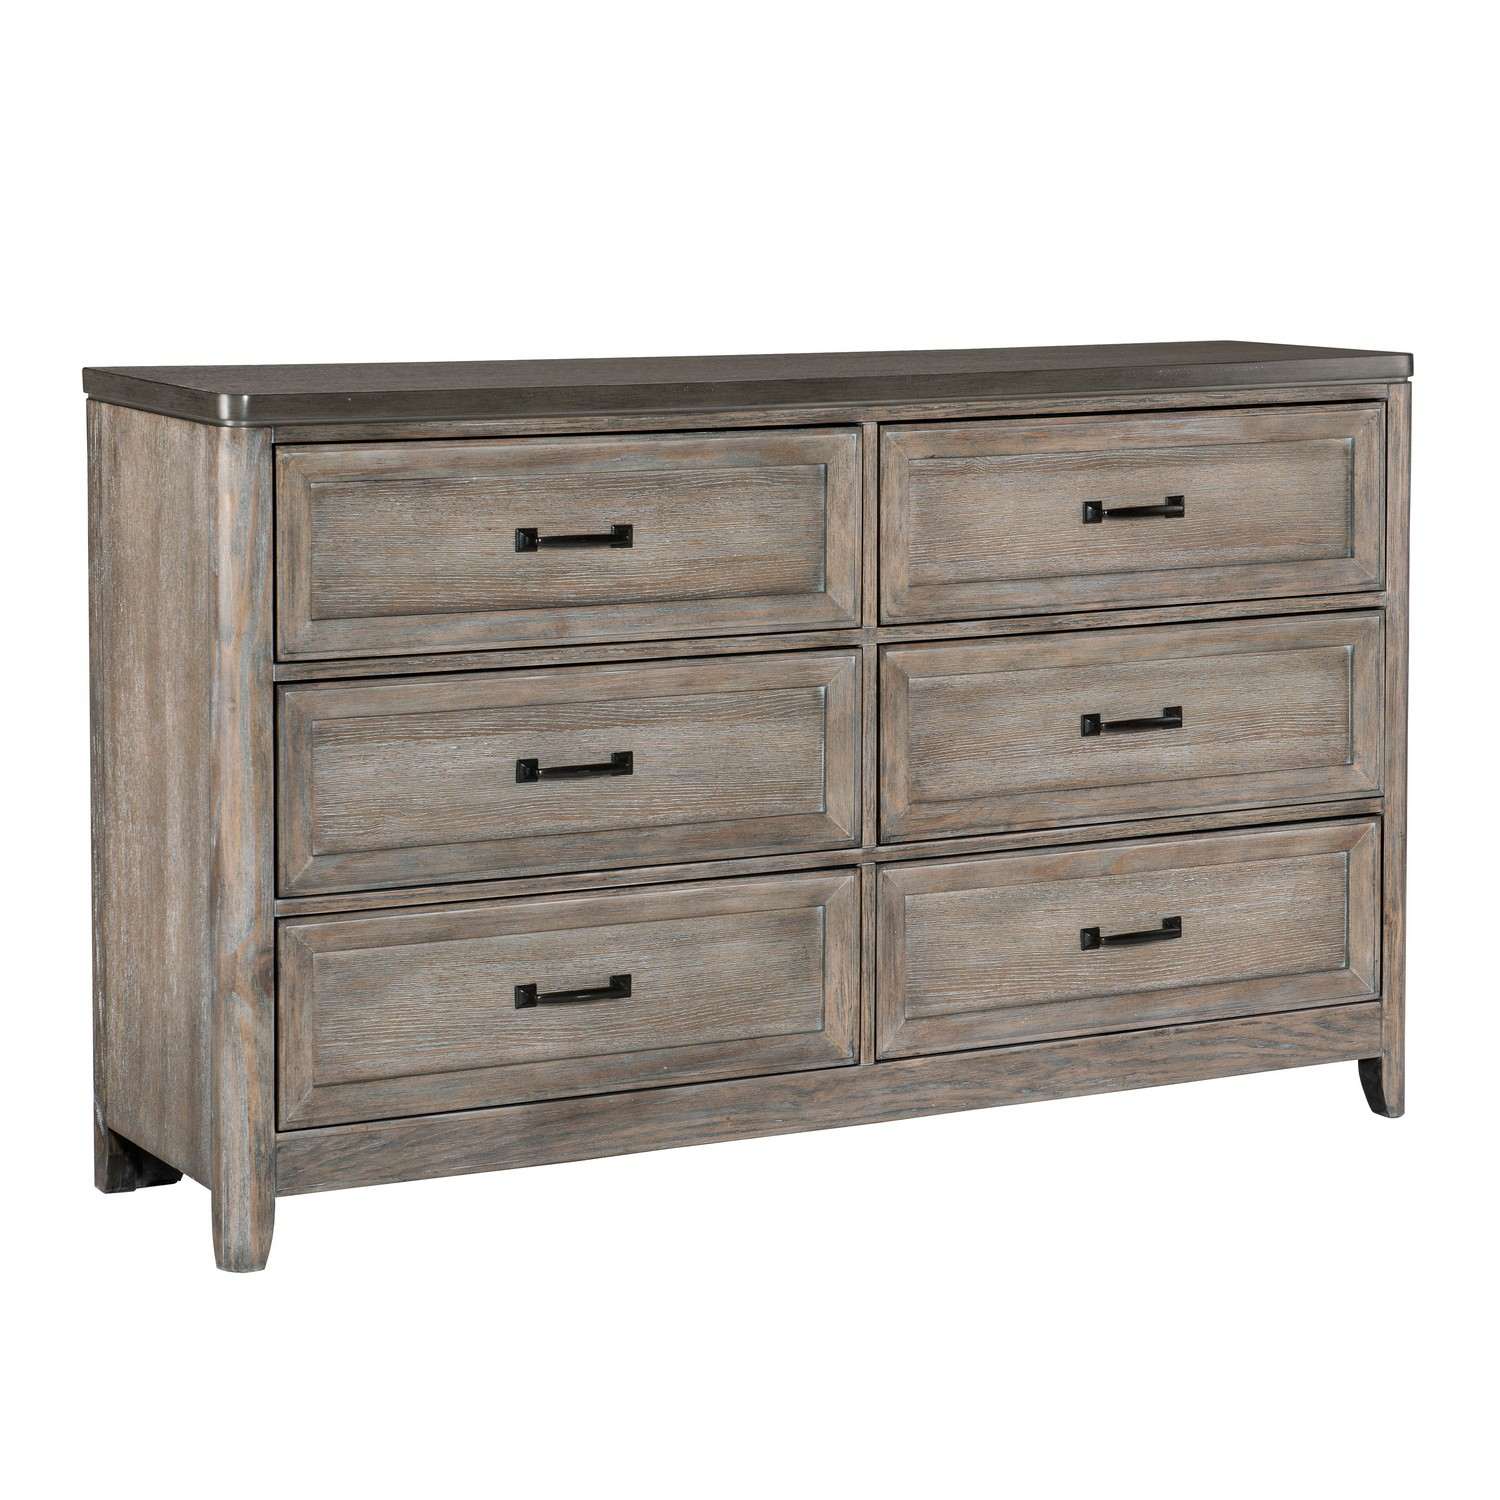 Homelegance Newell Dresser - Two-tone finish: Brown and Gray